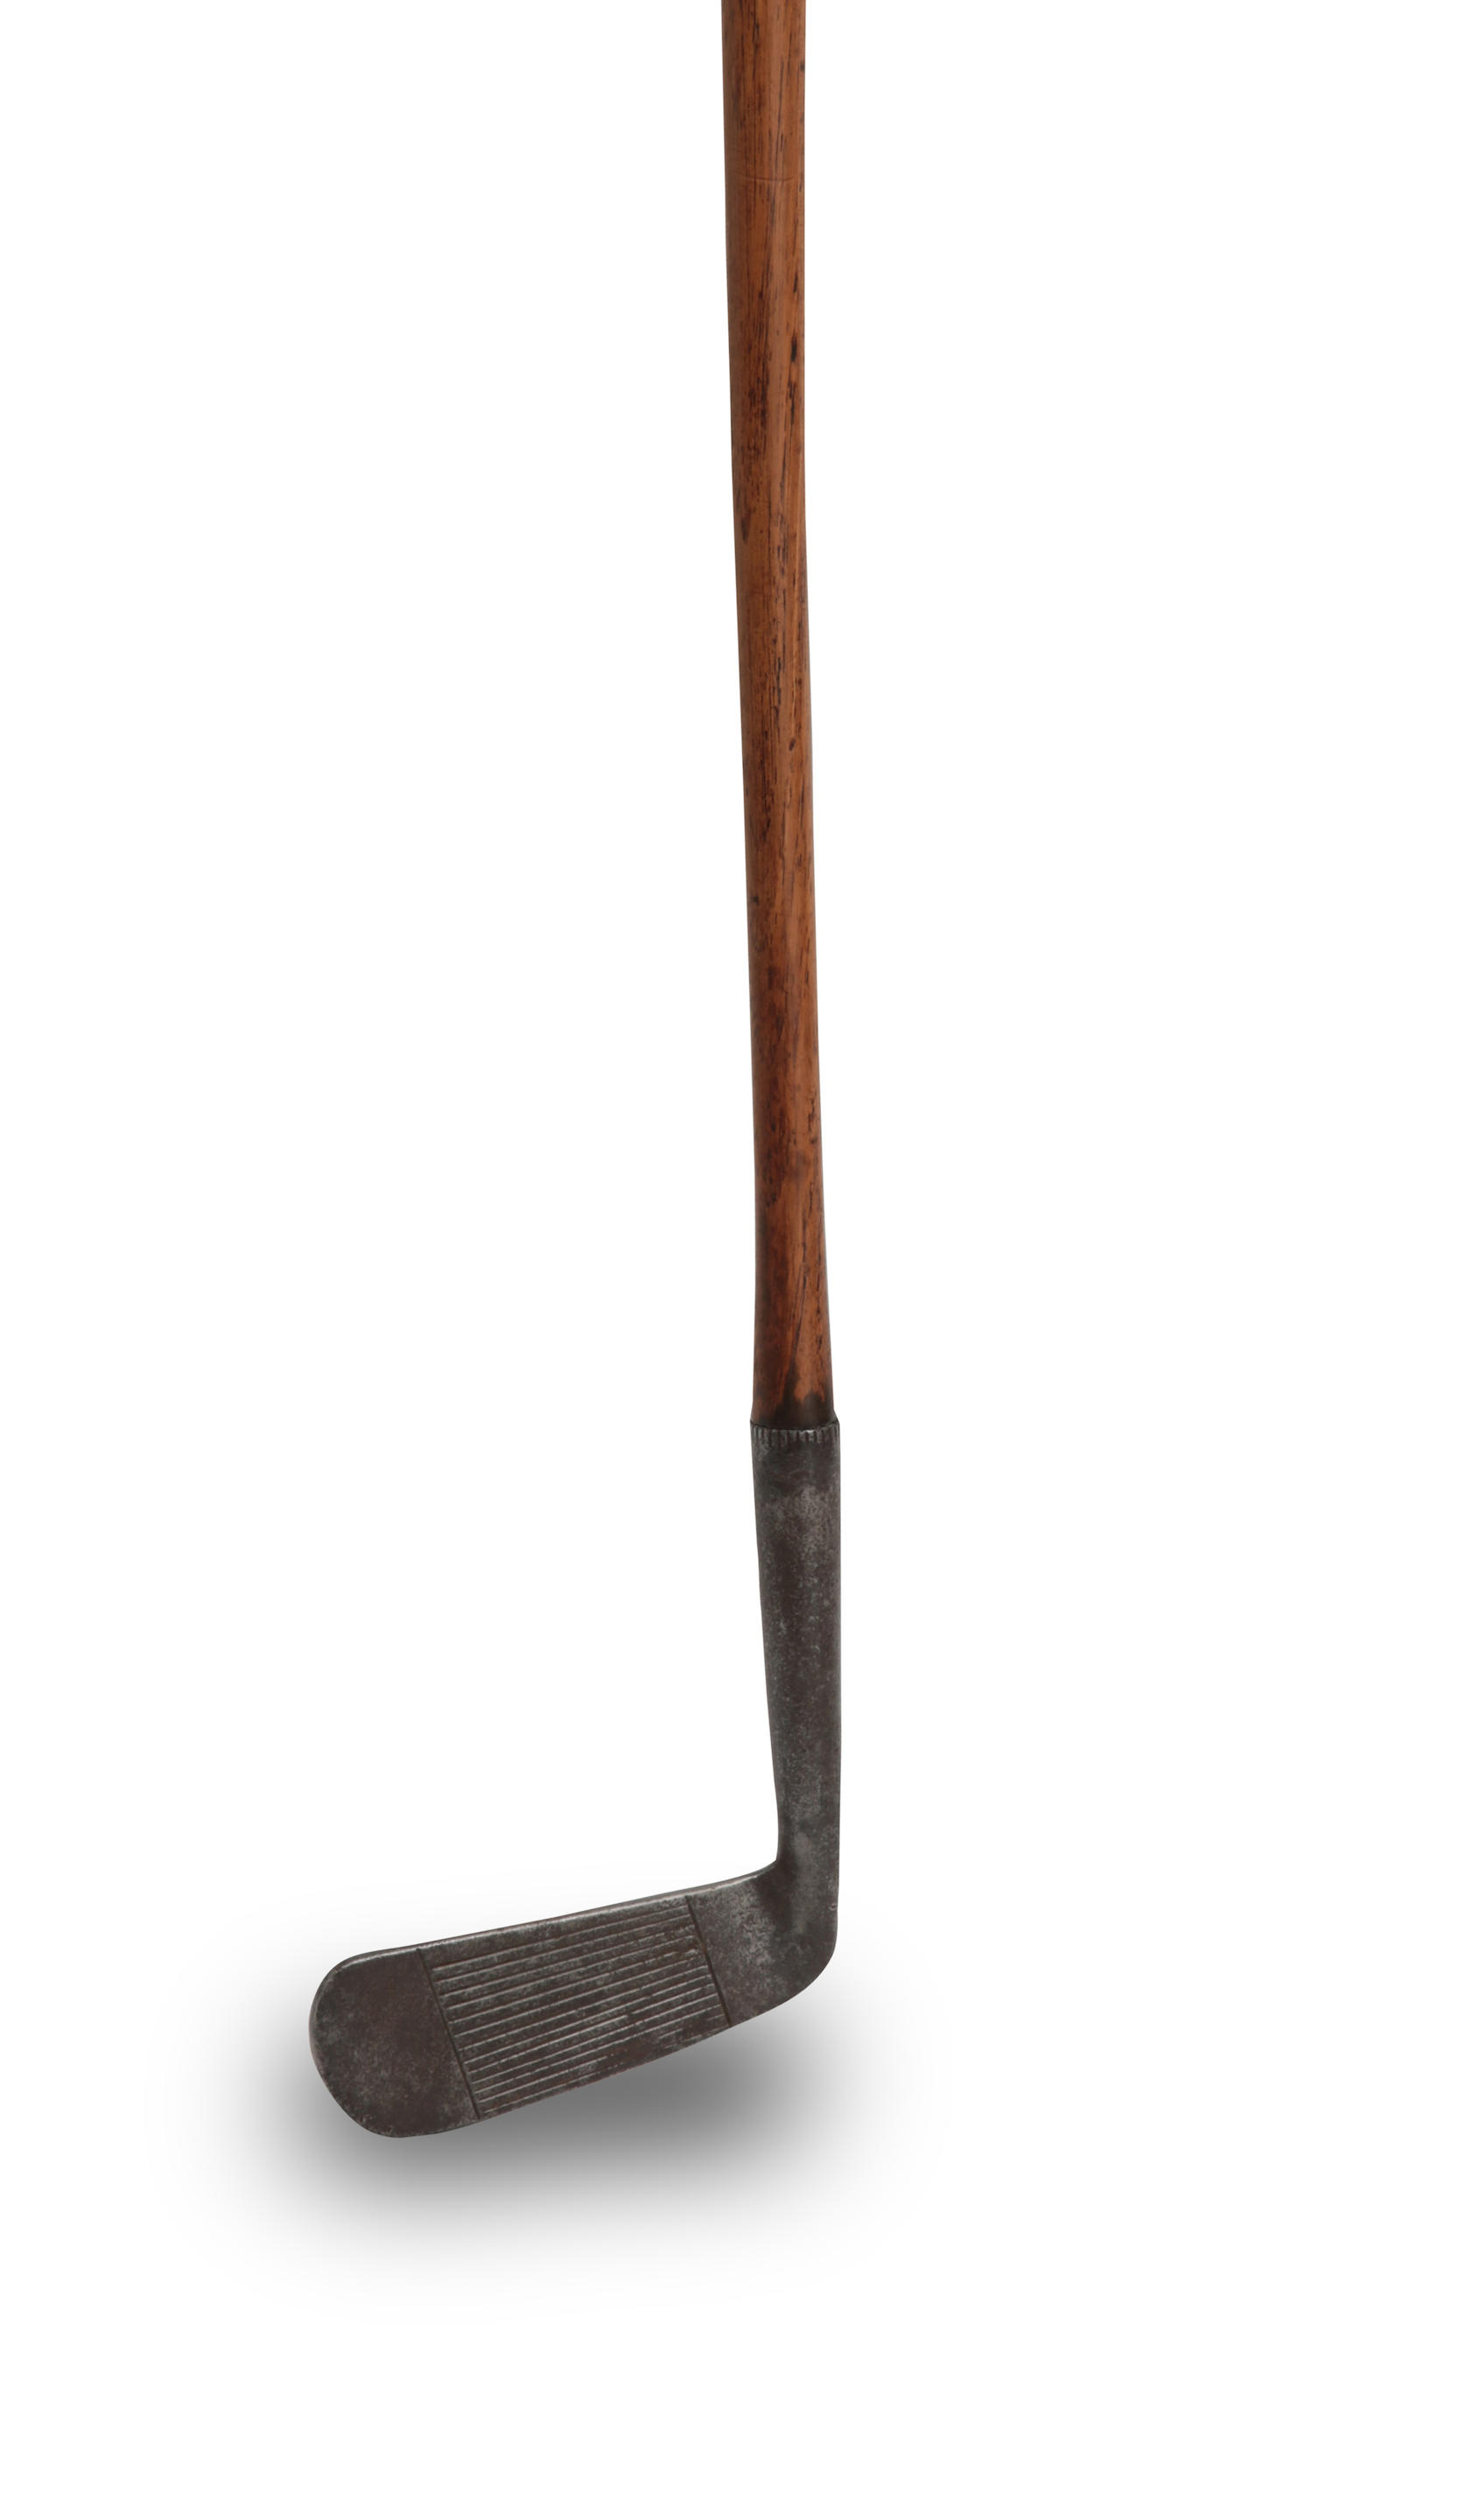 Bonhams : AN ARCHIE COMPTON 435 PATENTED BENT SHAFTED PUTTER, CIRCA 1926